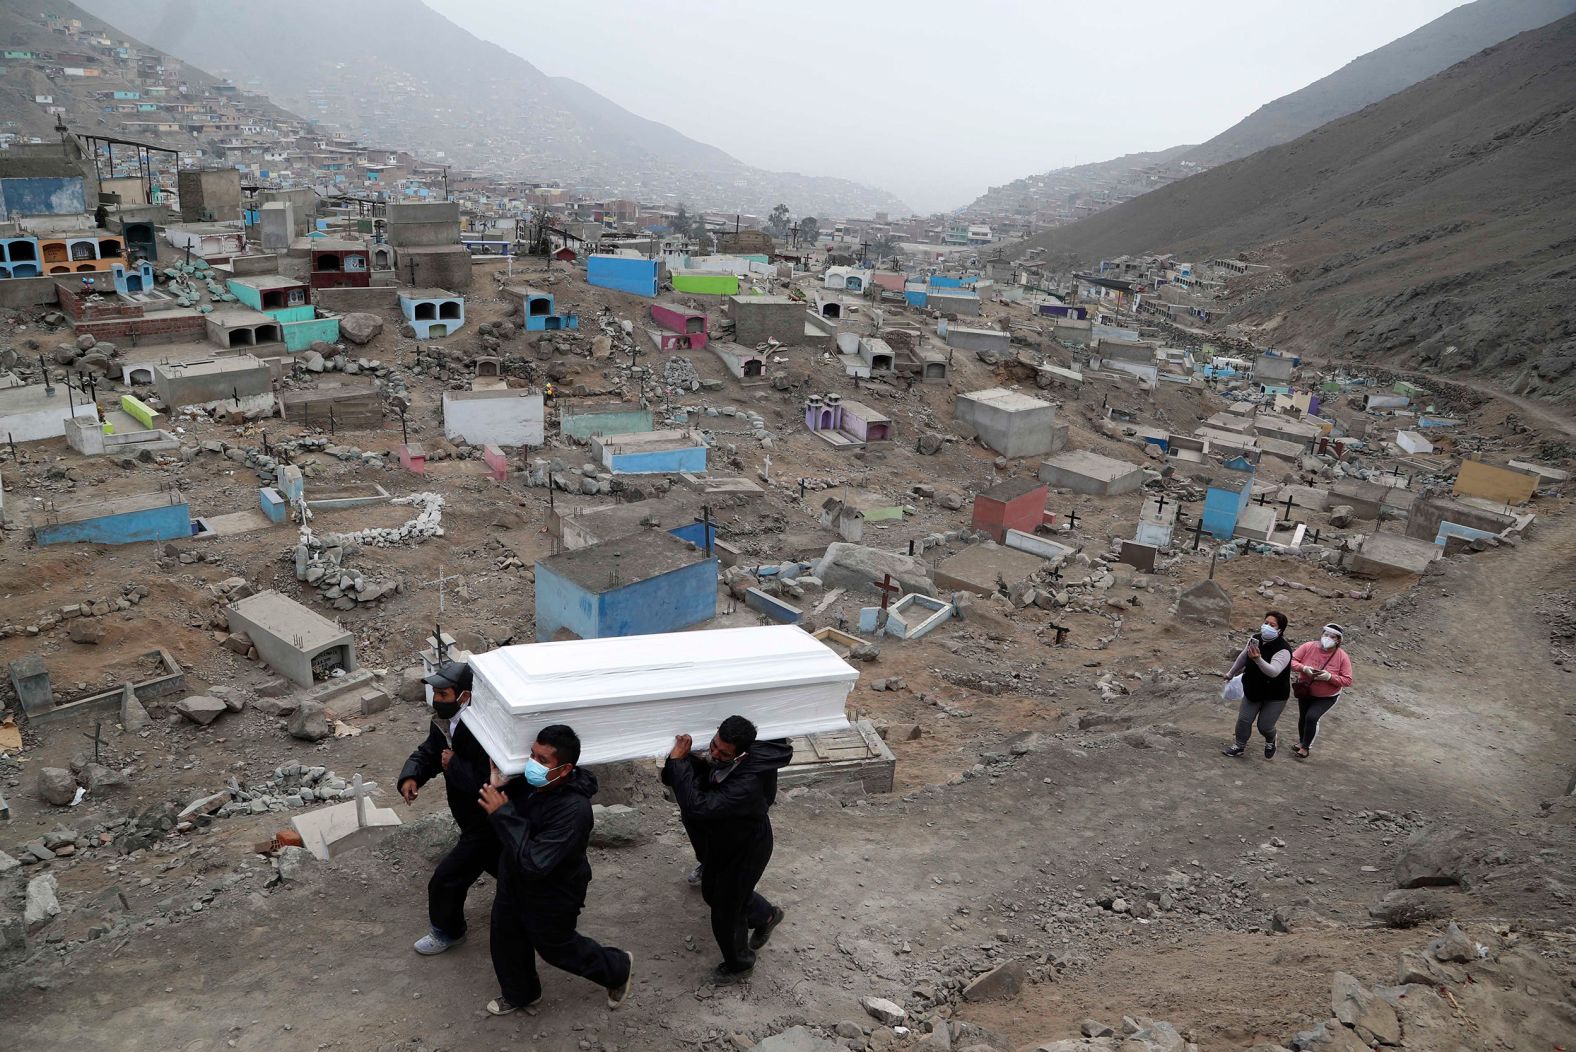 Cemetery workers carry Wilson Gil's remains on the outskirts of Lima, Peru, on August 26. Gil died of complications related to Covid-19, according to family members.